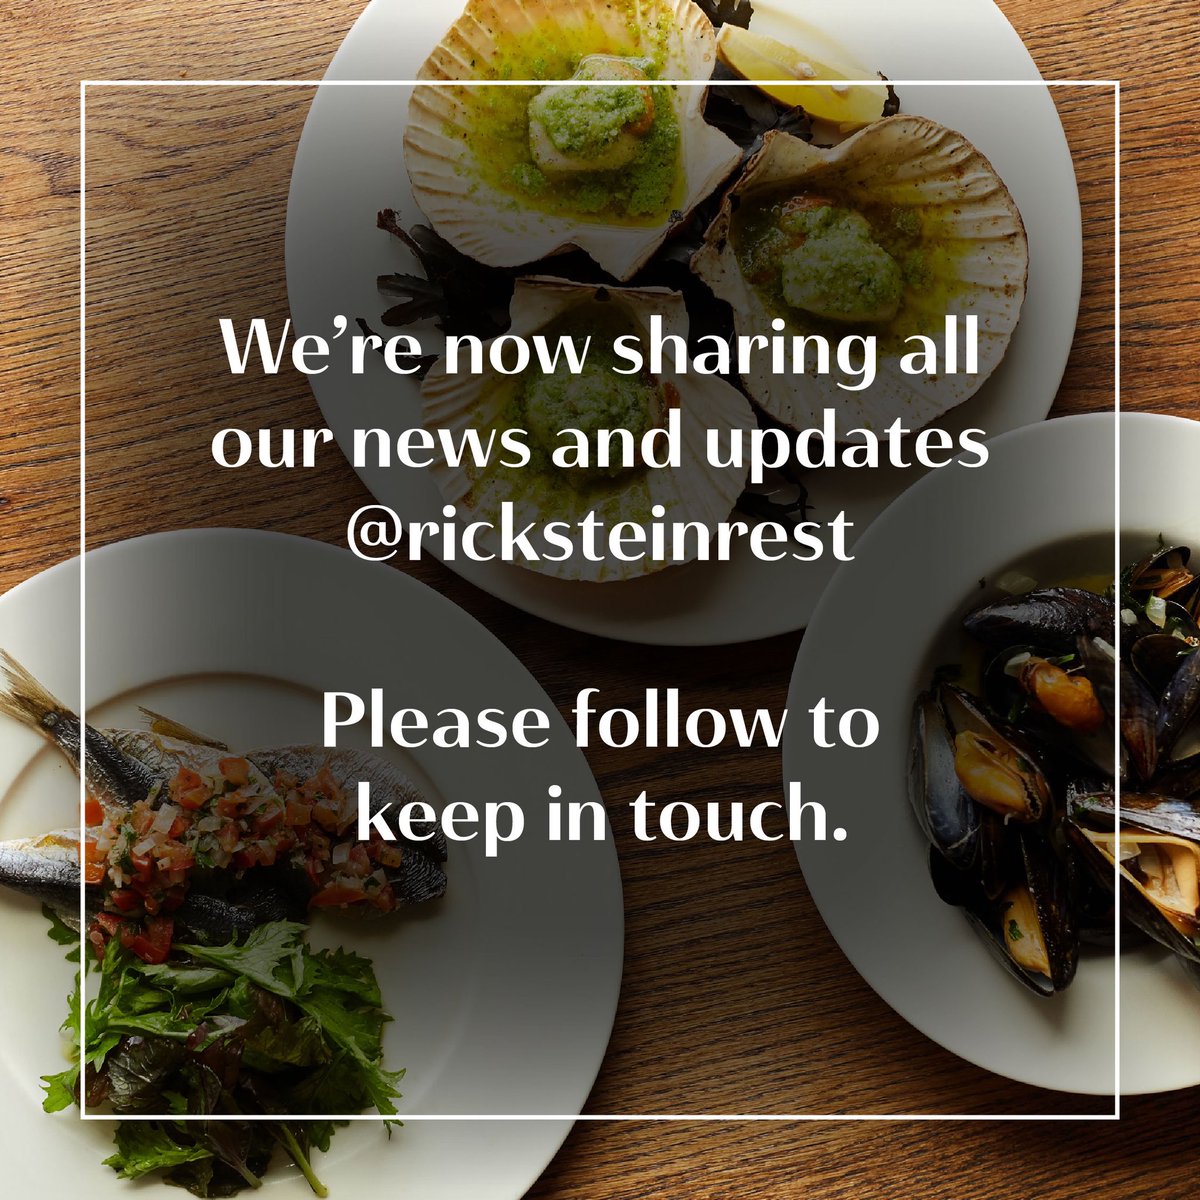 Head over to @RickSteinRest to catch up with our news from now on - thank you.